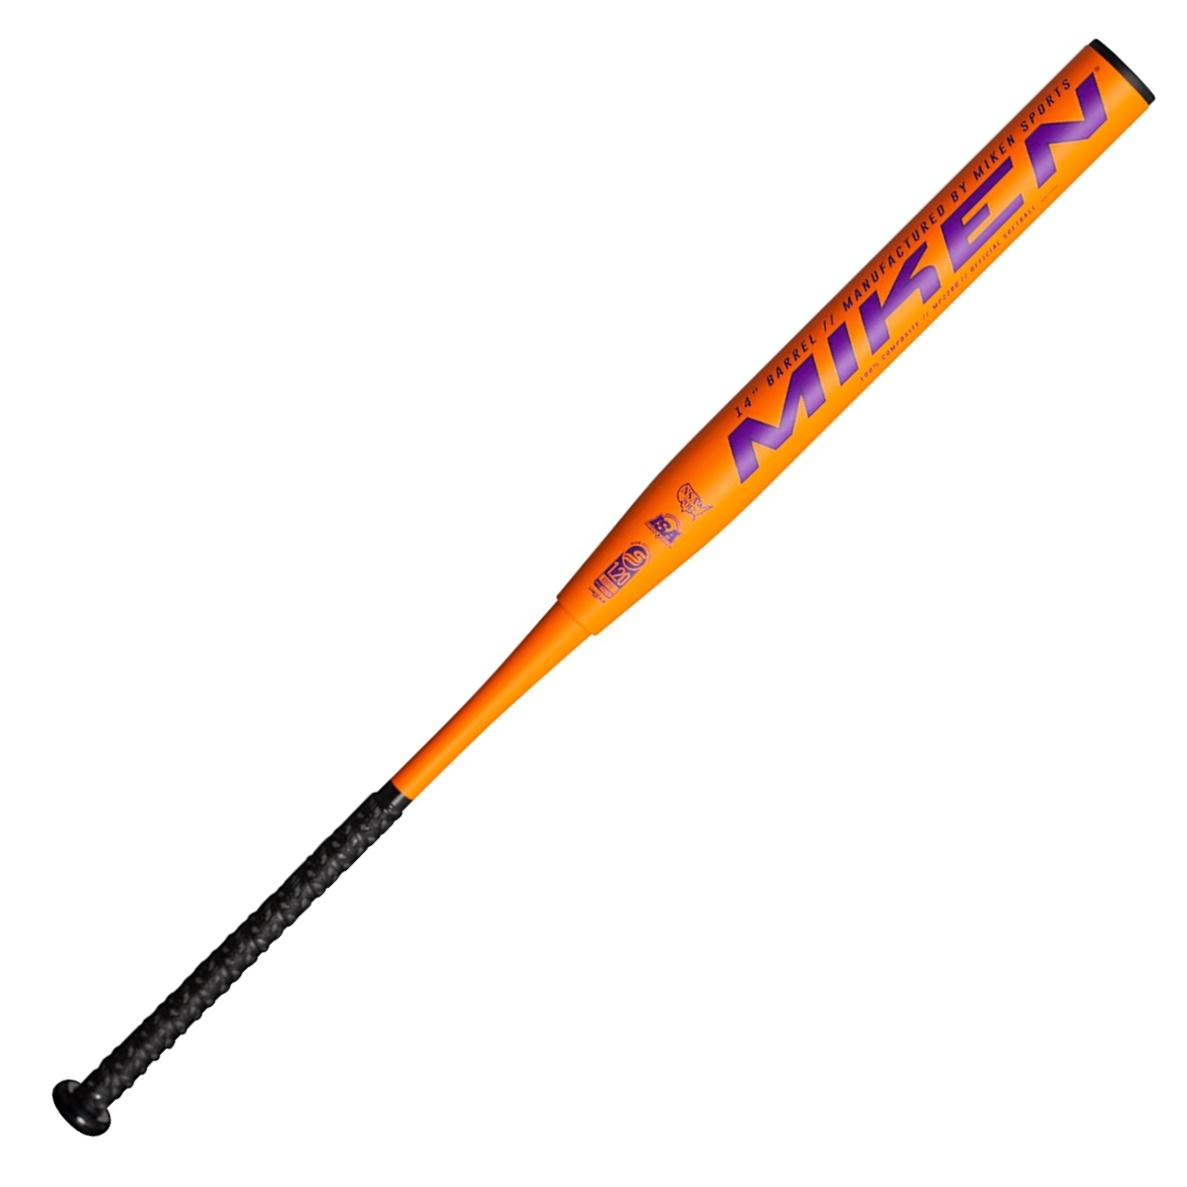 The Miken Freak Primo 14 Balanced Slowpitch USSSA Bat boasts EFLEX 360 Technology for optimal barrel flexibility, performance, and durability. The use of exclusive premium grade C-4 Carbon Fiber maximizes the composite structure for unmatched performance and consistency. The innovative F4P Energy Transfer system enhances the transfer of energy from handle to barrel for maximum performance and flexibility. The A1 Knob, with its compact design, offers improved comfort at the plate. This bat is certified for play in USSSA, ISA, and NSA leagues.